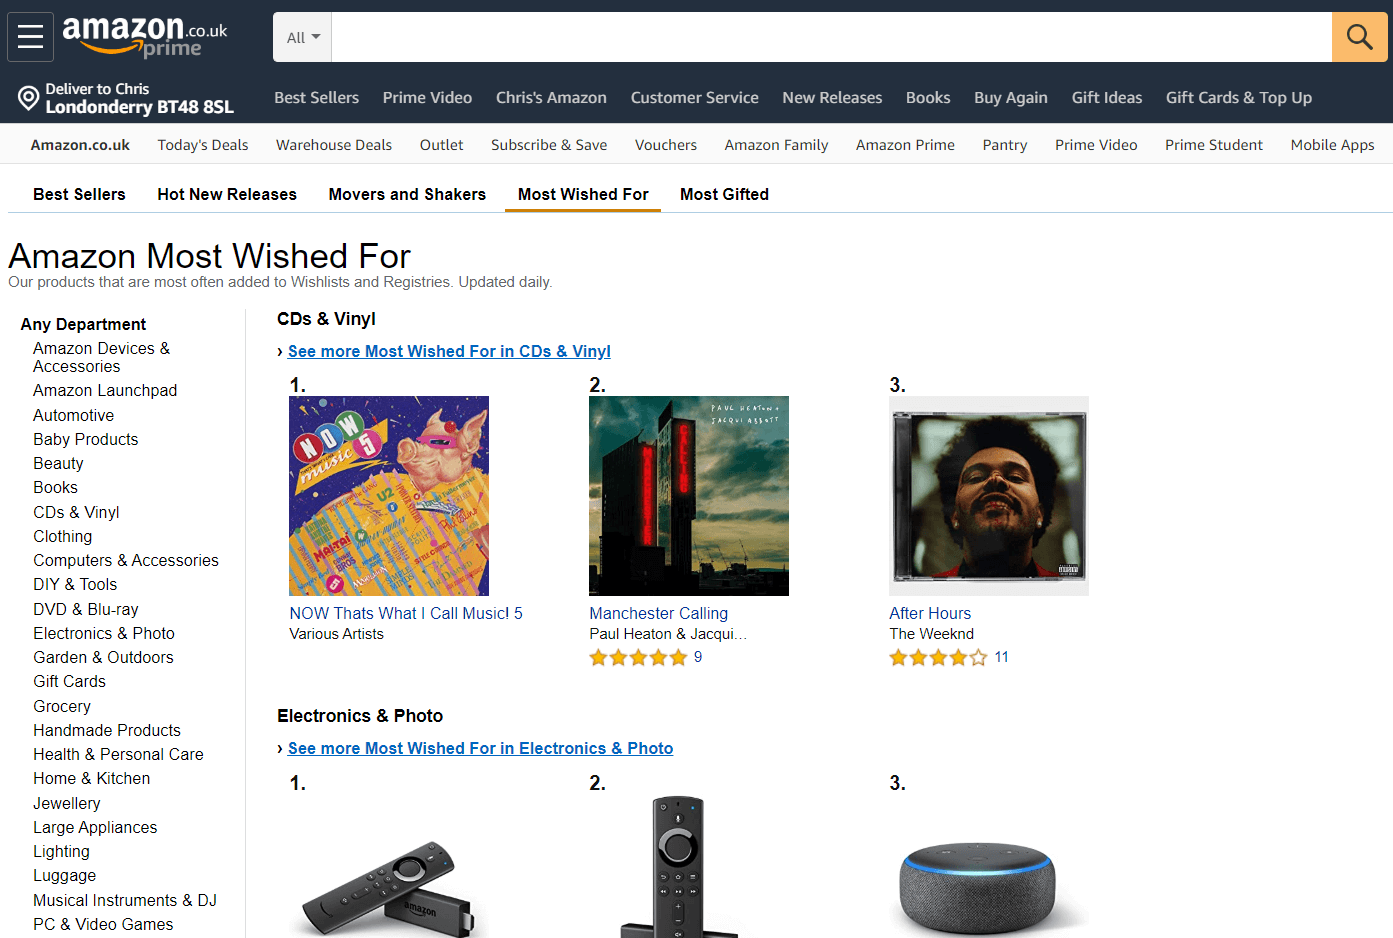 Amazon Most Wished For